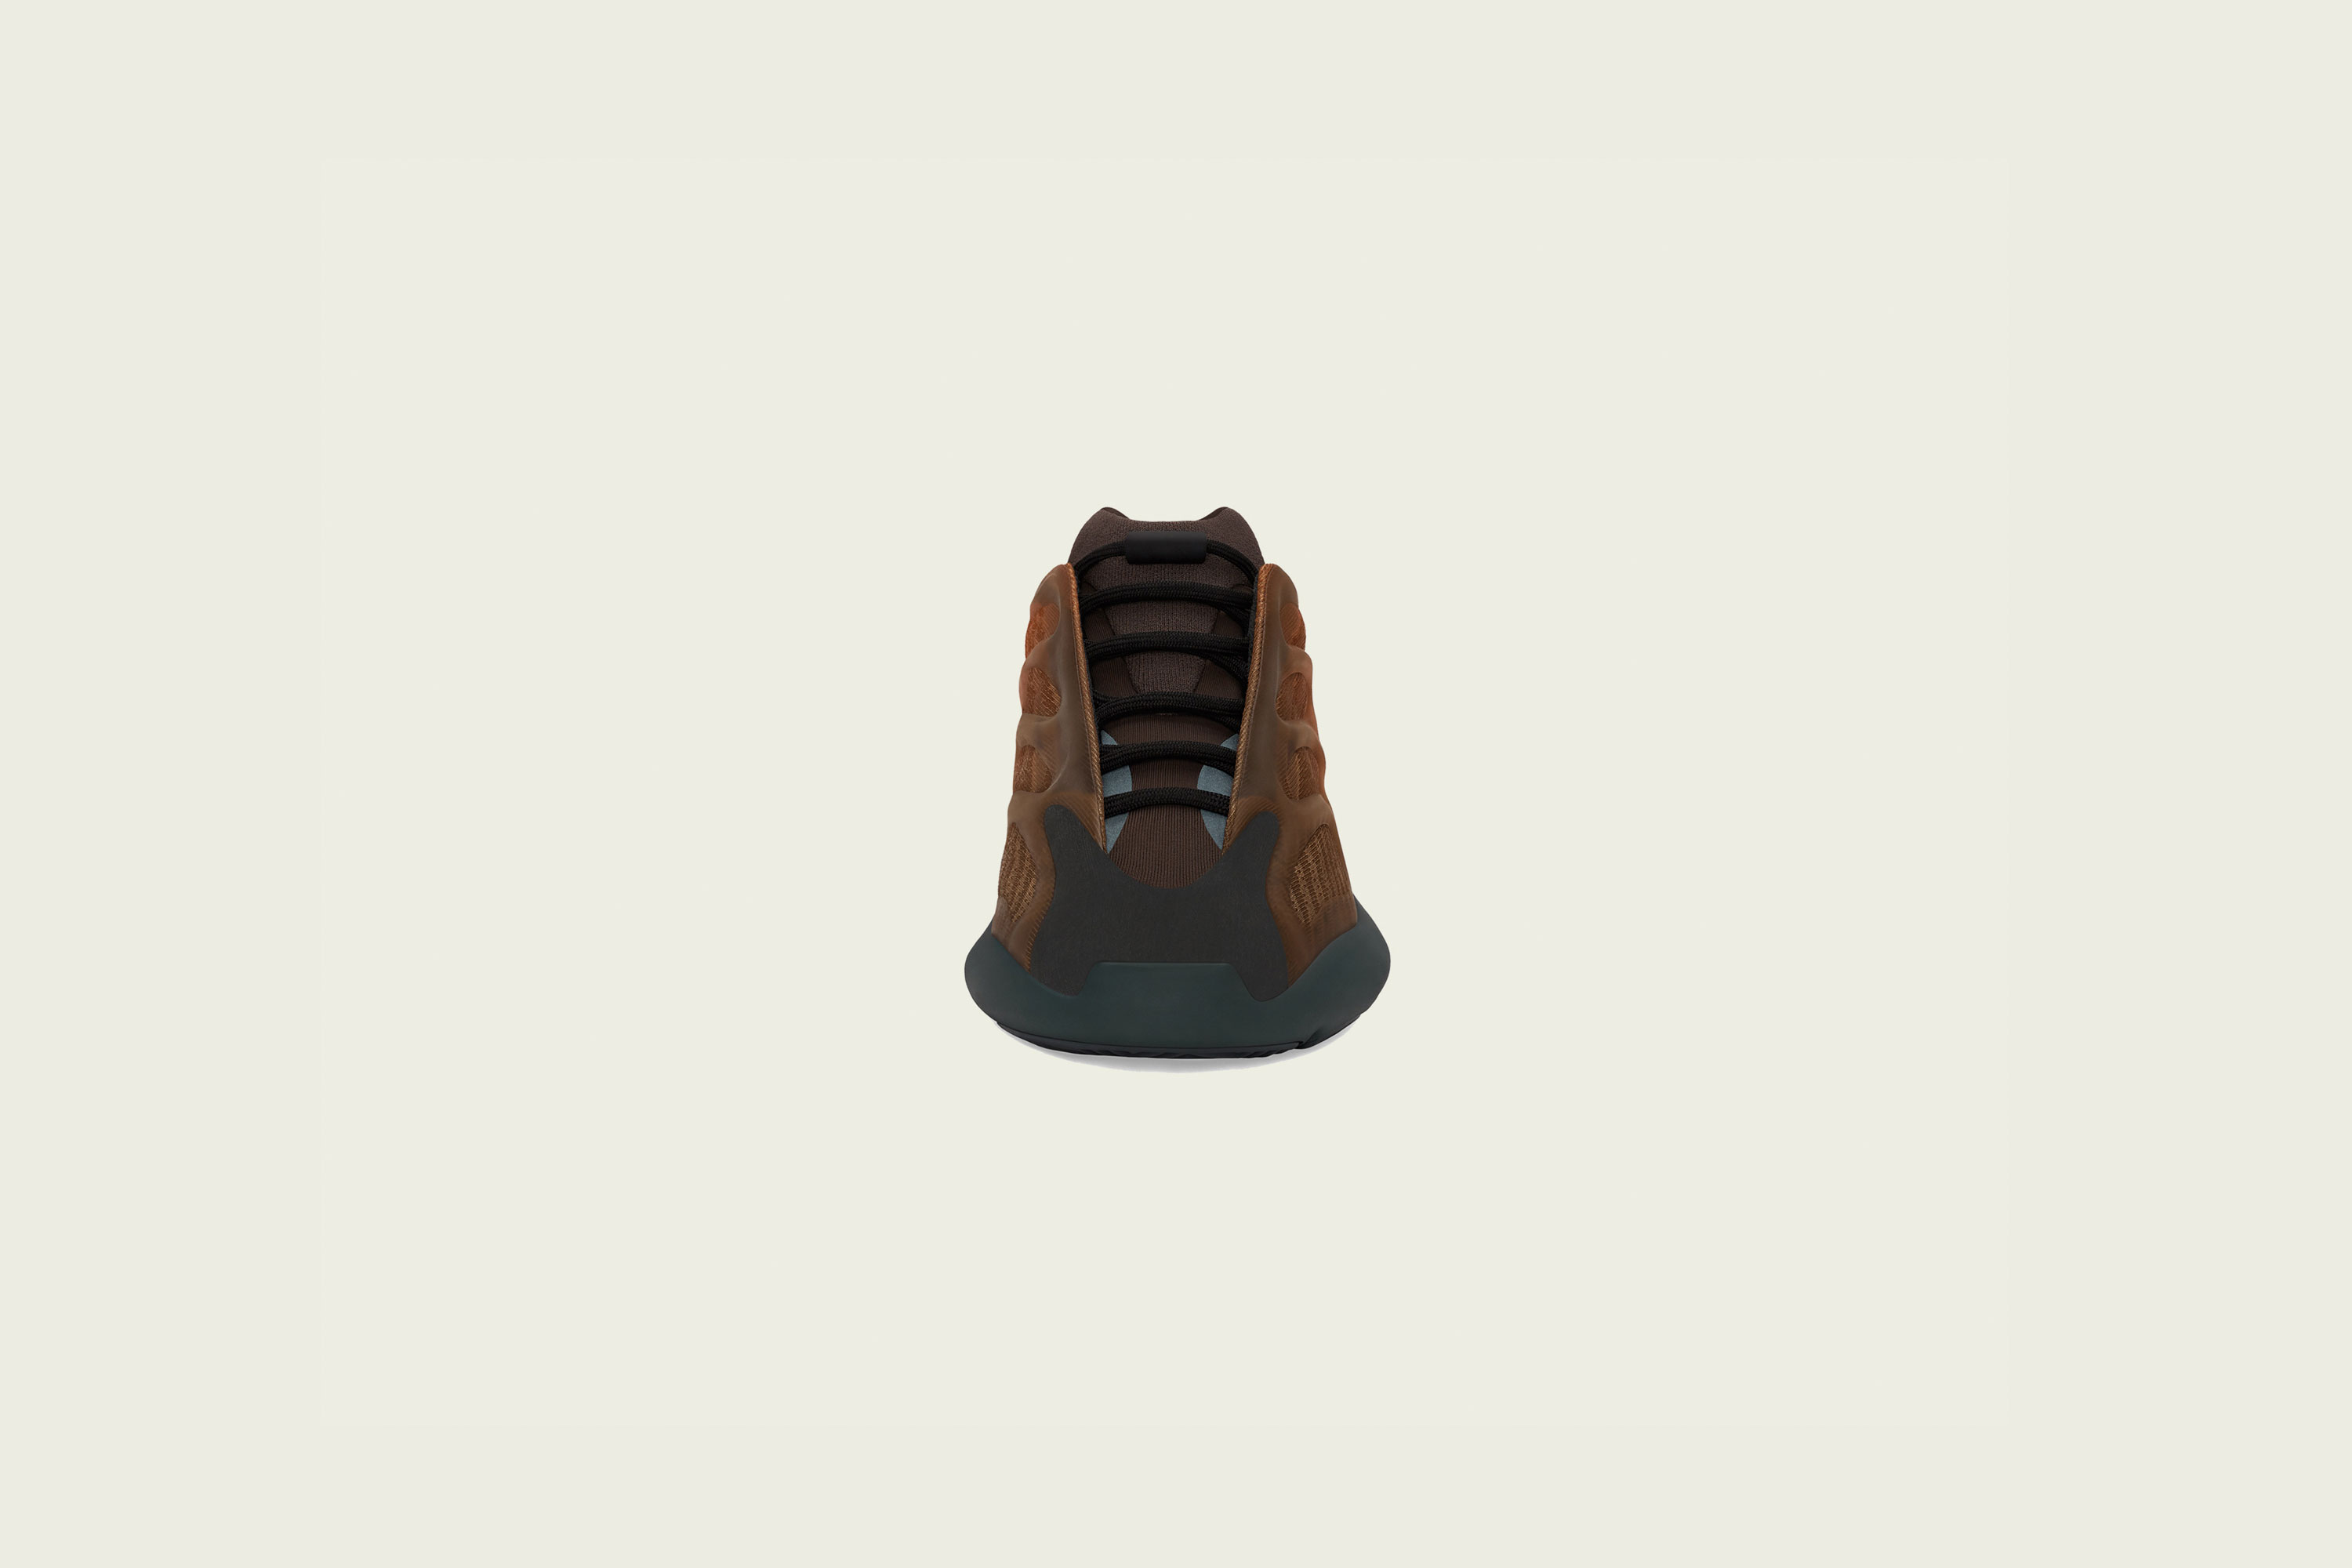 Up There Launches - adidas Originals Yeezy 700v3 - Copper Fade